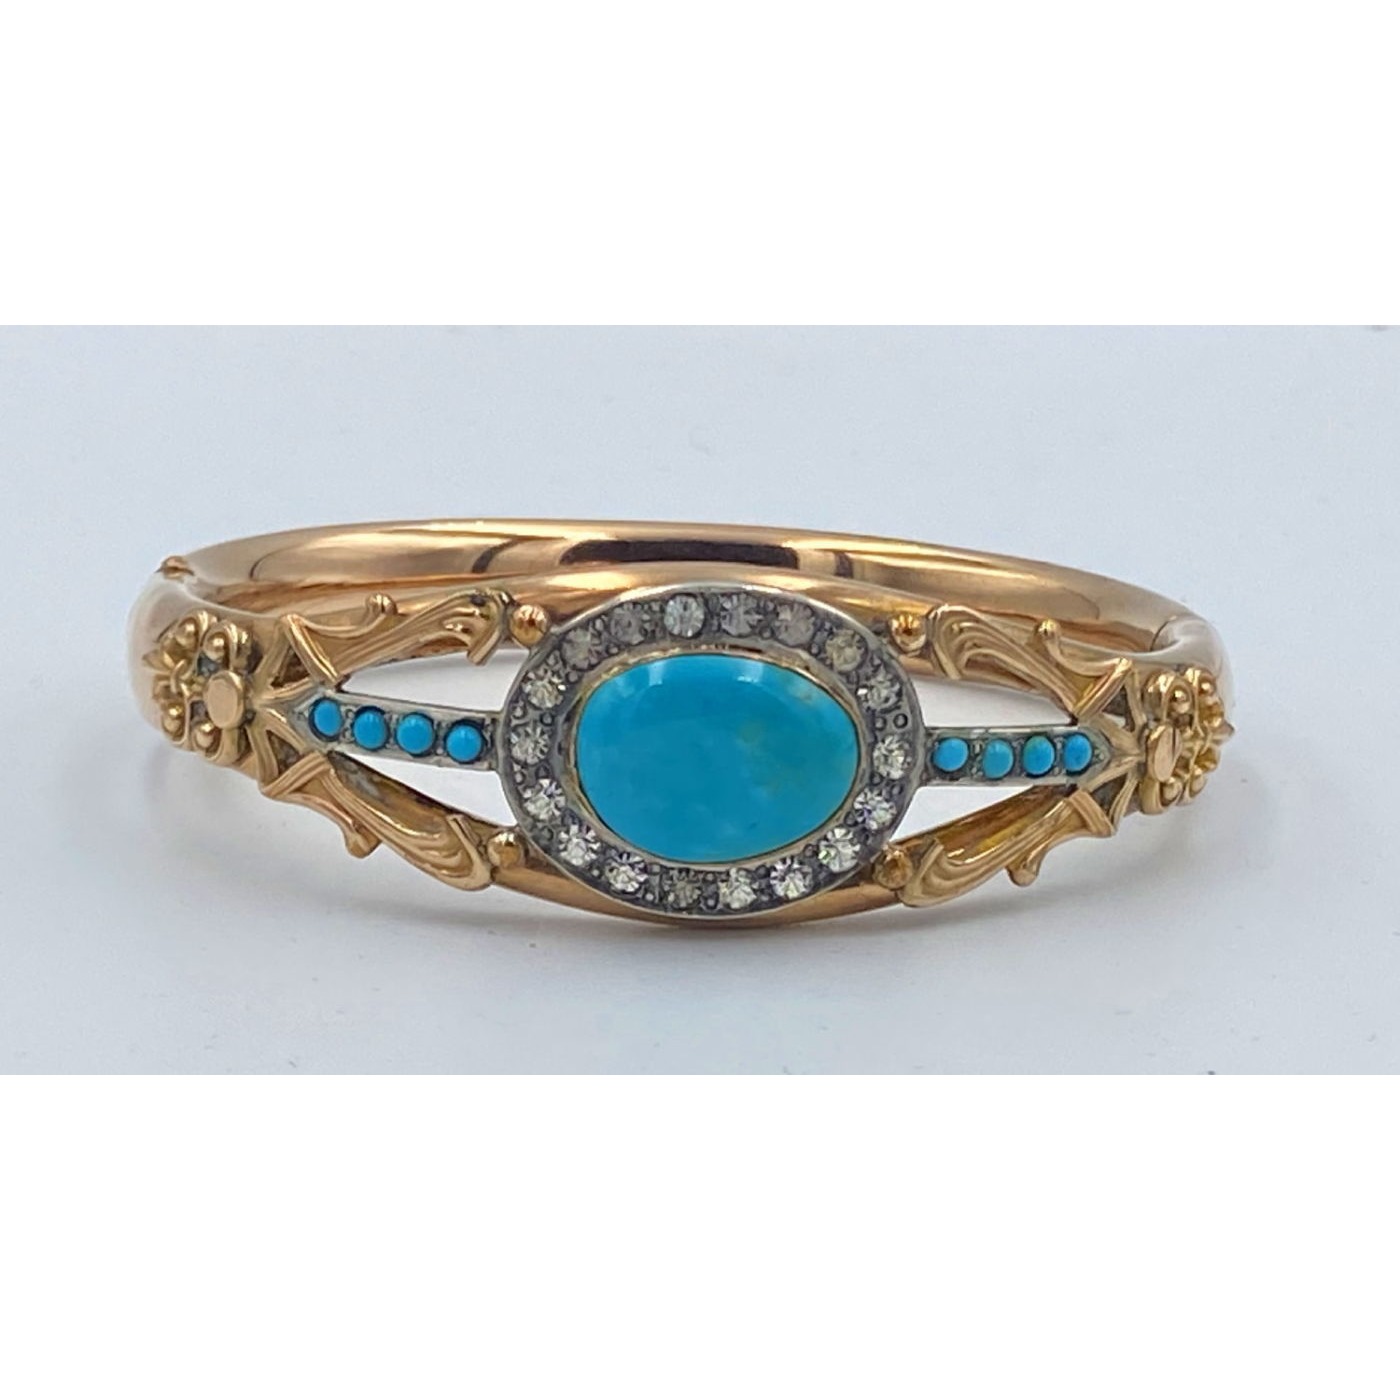 Exceptional Persian Turquoise and Paste Stones Bangle Bracelet